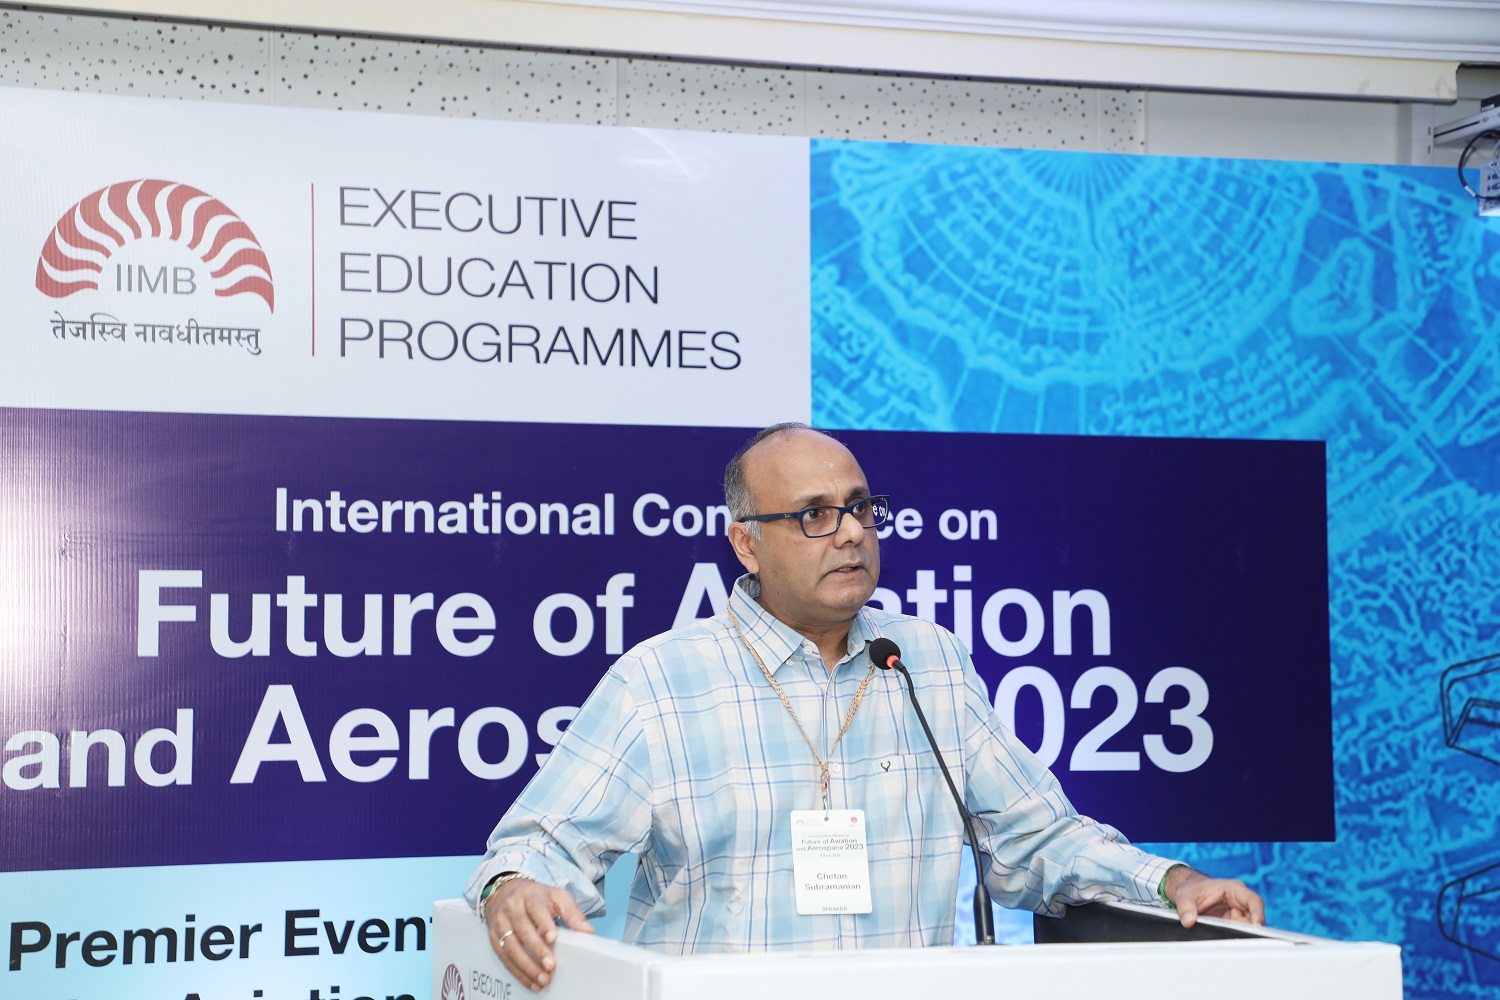 Prof. Chetan Subramanian, Dean, Faculty and faculty from the Economics area, IIMB speaks on 'The Impact of Macroeconomic Environment on Aviation and Aerospace'.